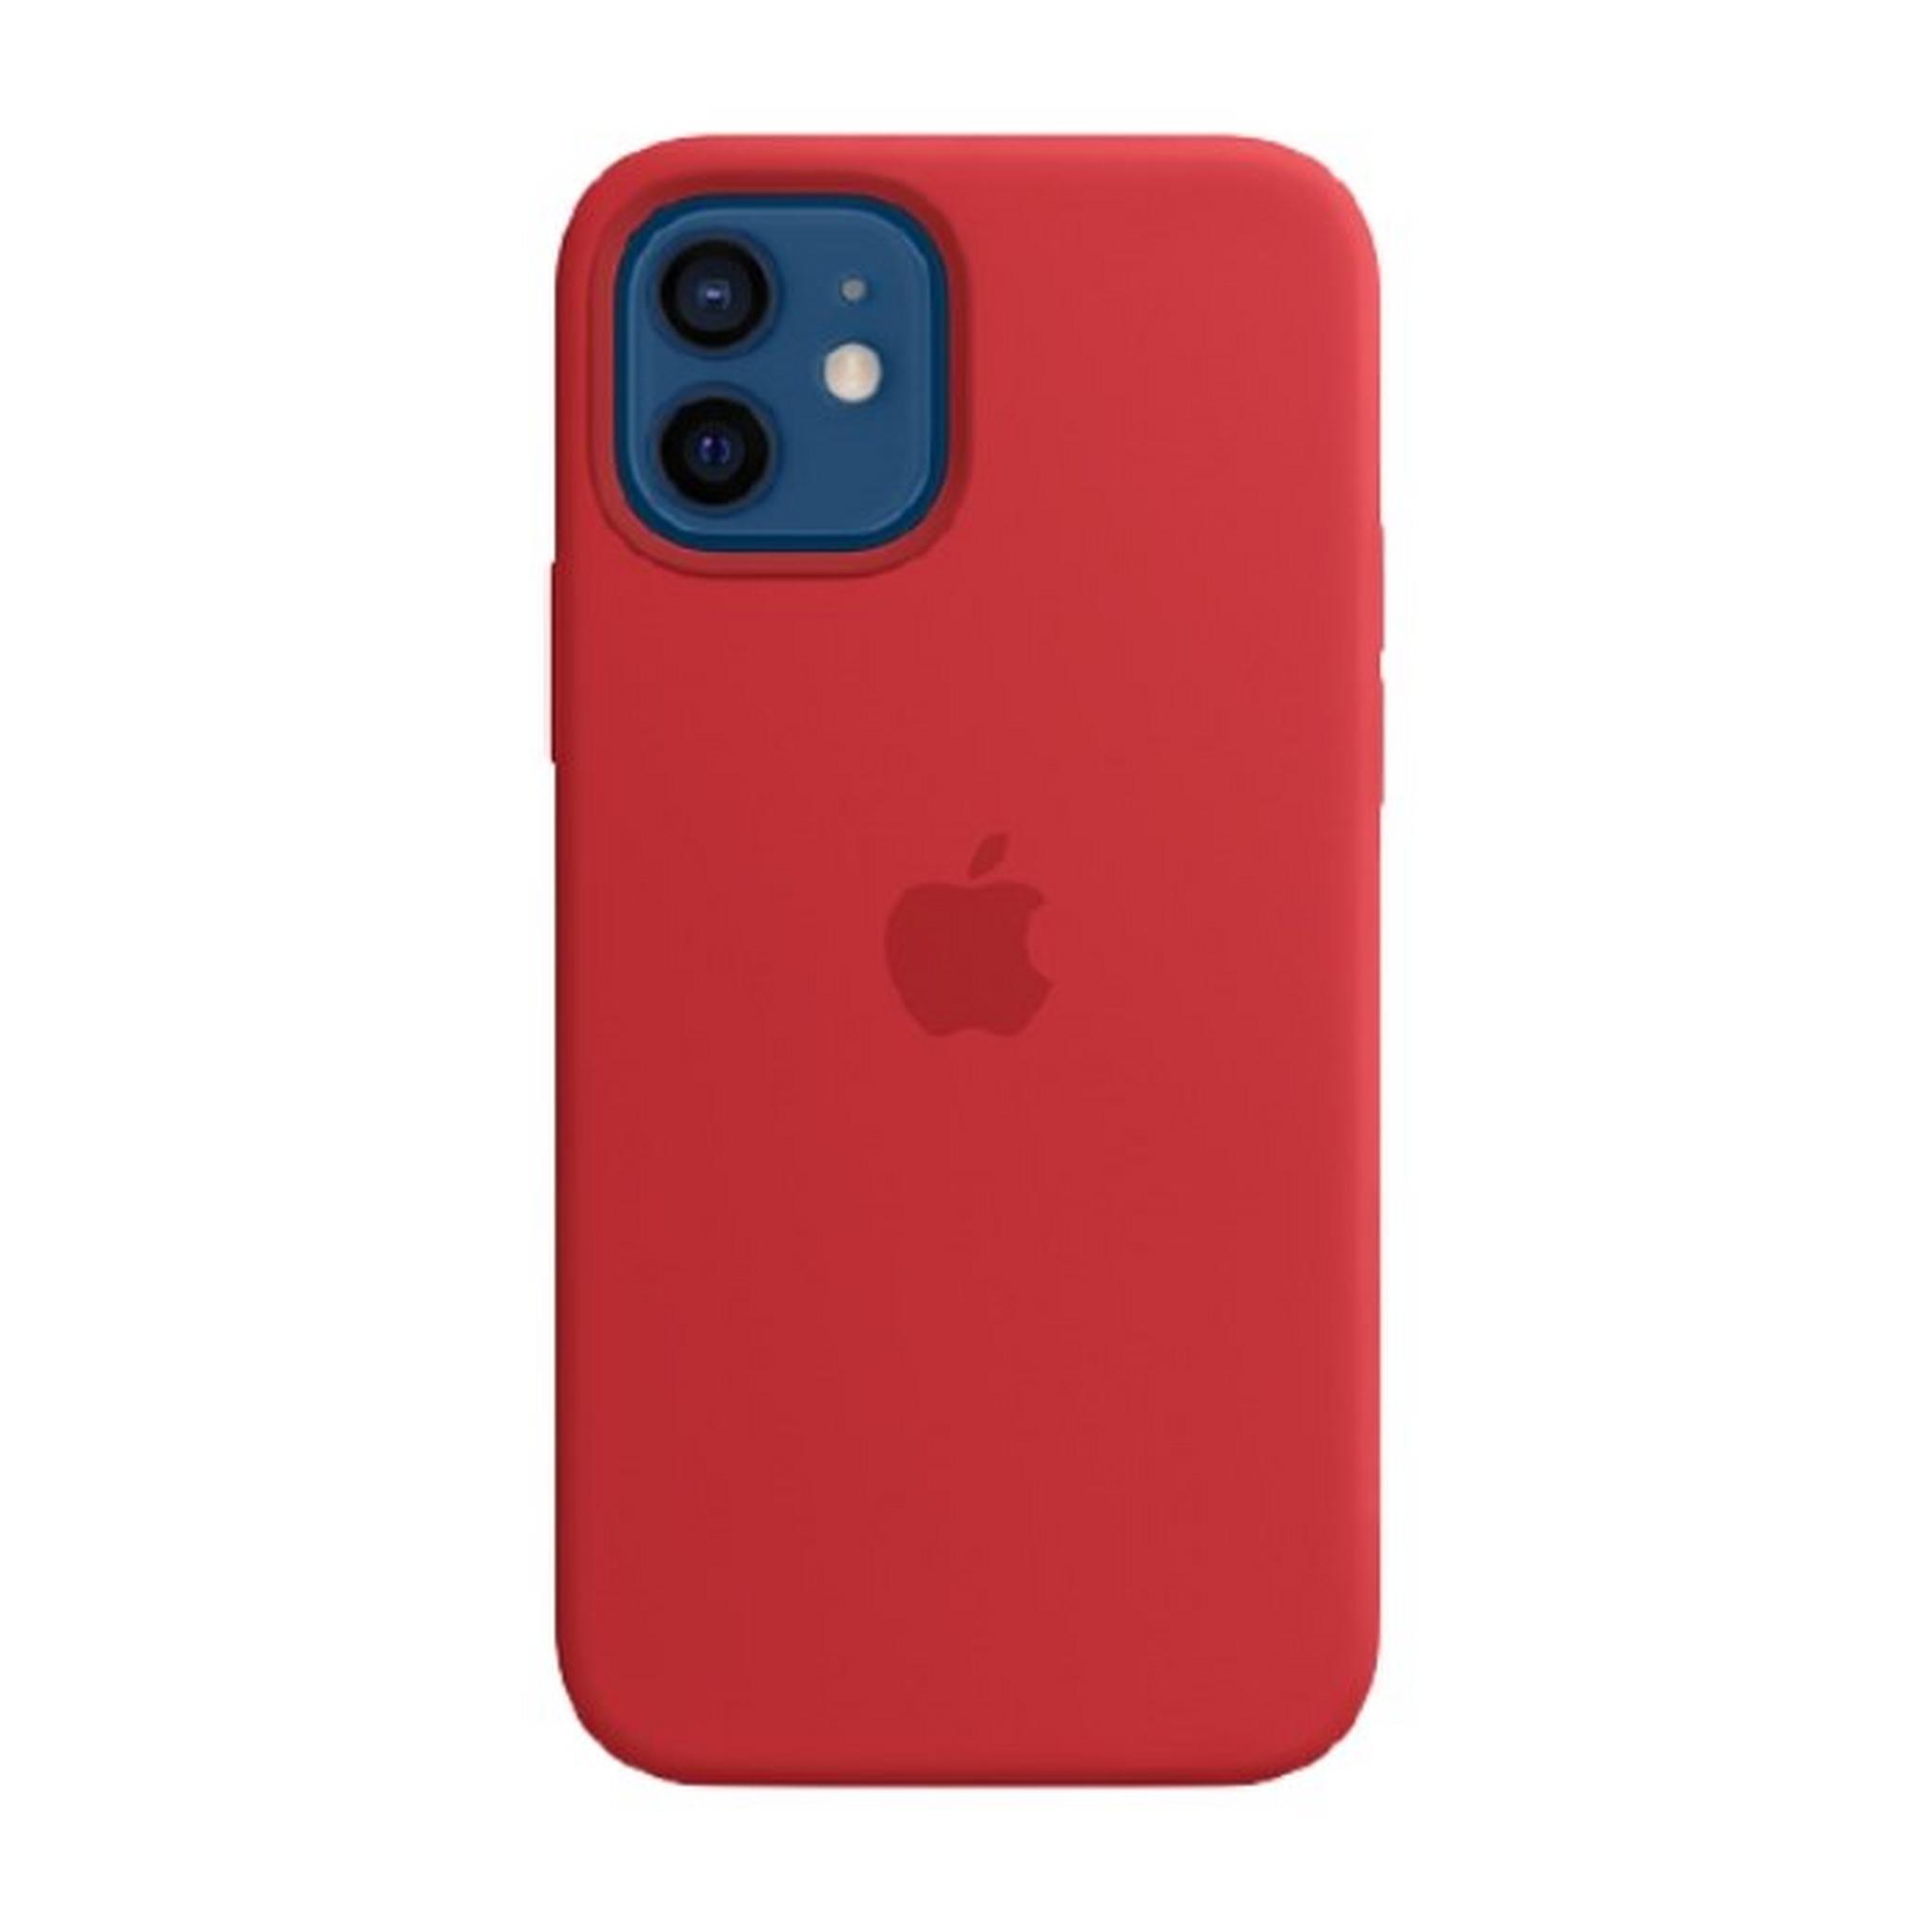 Apple iPhone 12 Pro MagSafe Silicone Case - Red